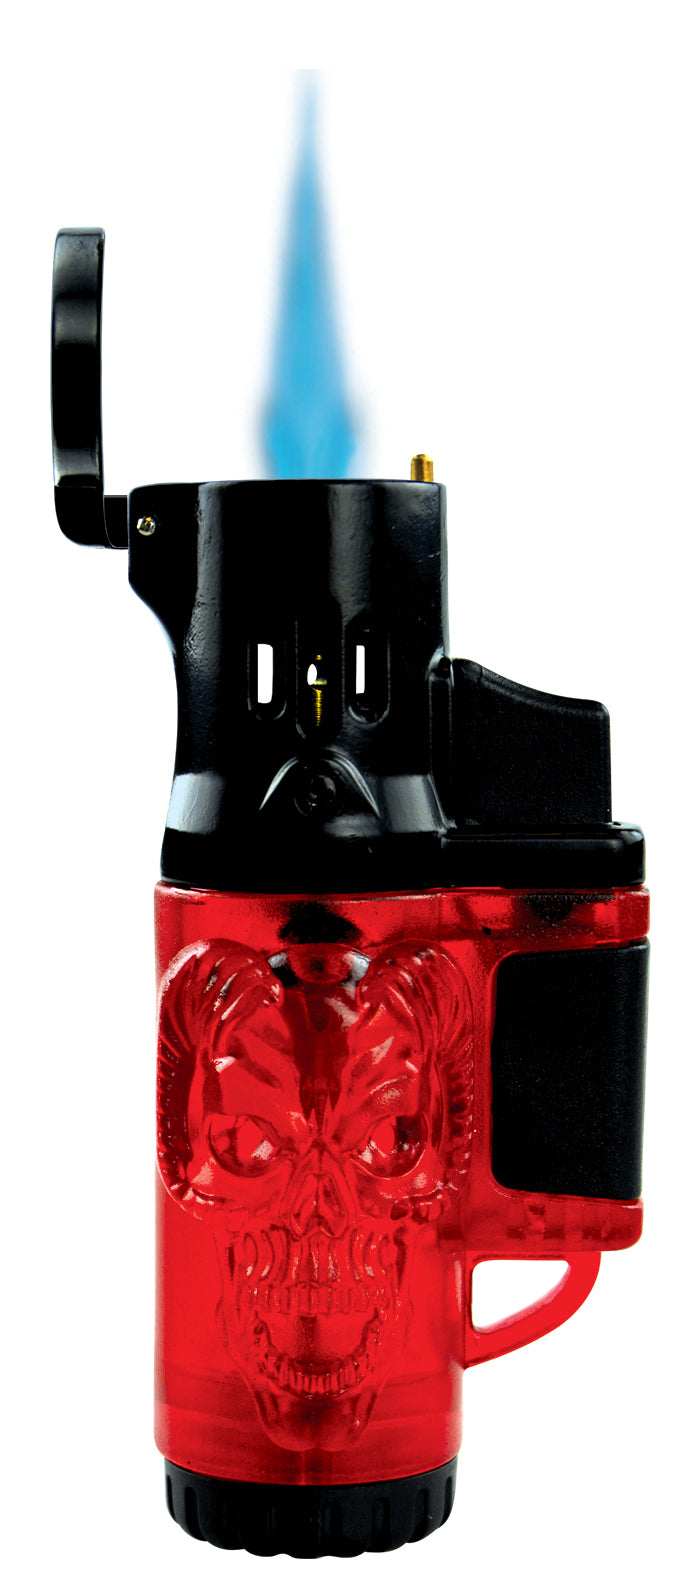 ITEM NUMBER 021915 MOLDED TORCH LIGHTER B 12 PIECES PER DISPLAY